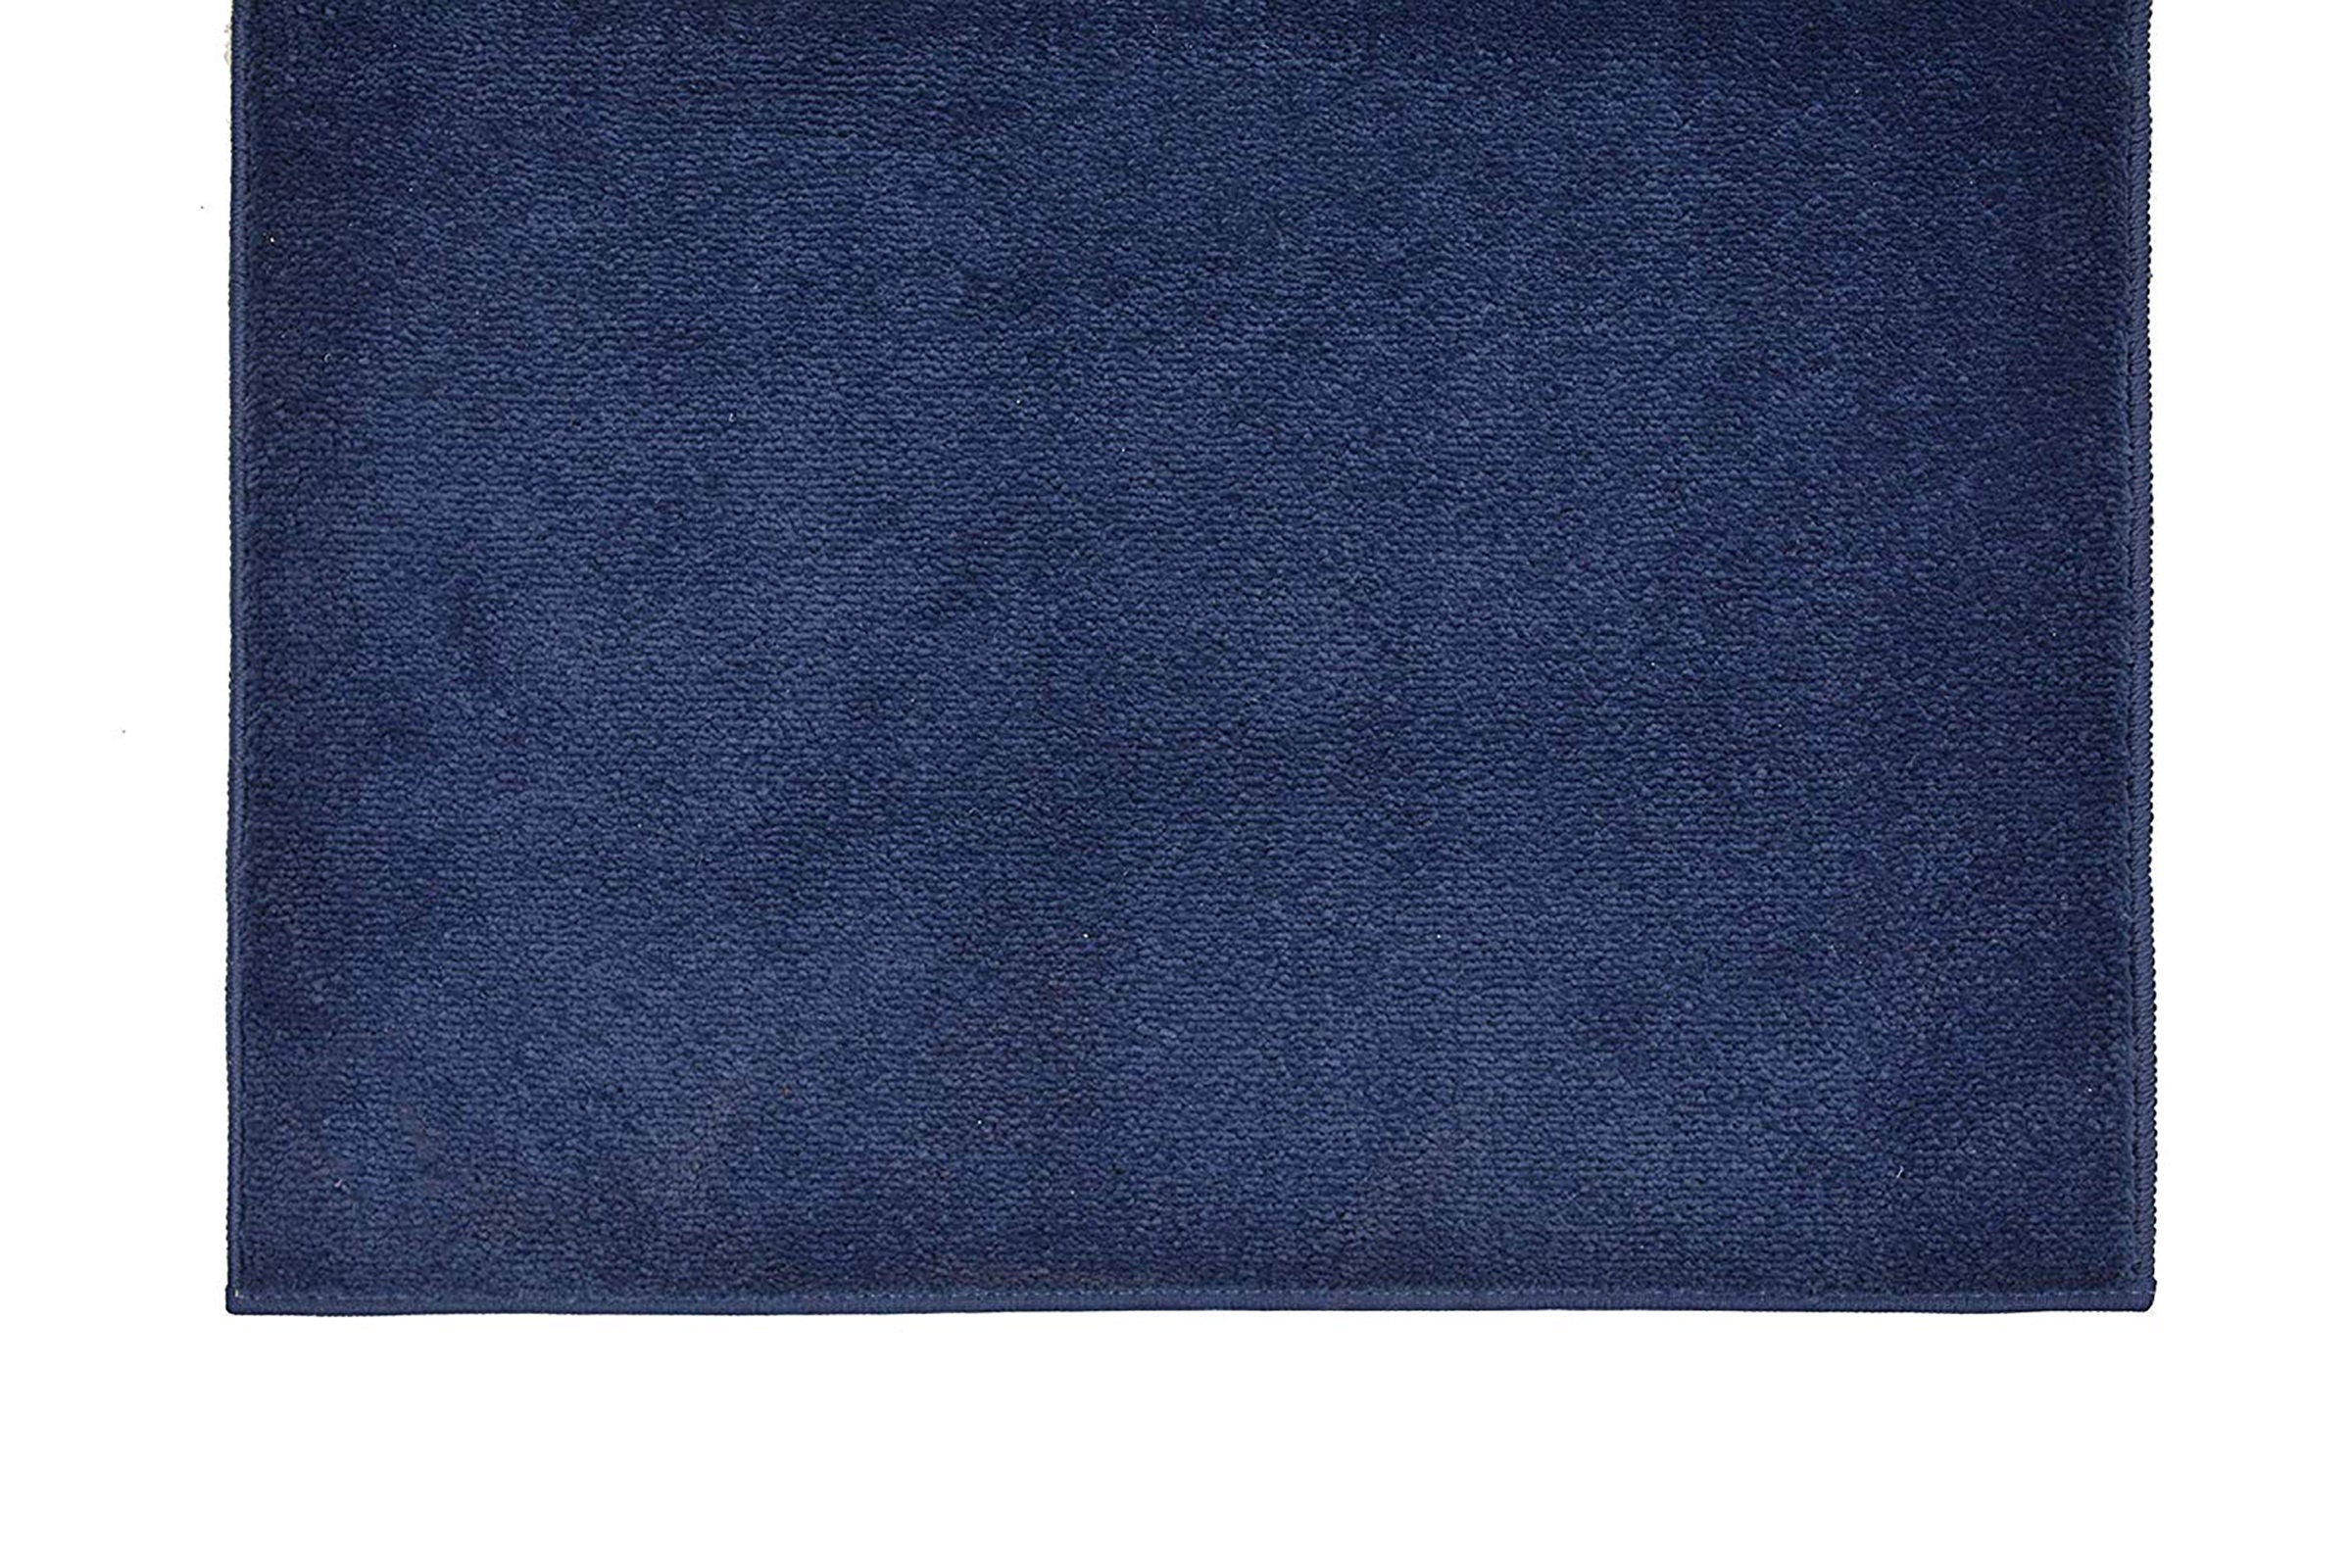 Machine Washable Custom Size Runner Rug Solid Navy Blue Color Skid Resistant Rug Runner Customize Up to 50 Feet and 26 Inch Width Runner Rug-8